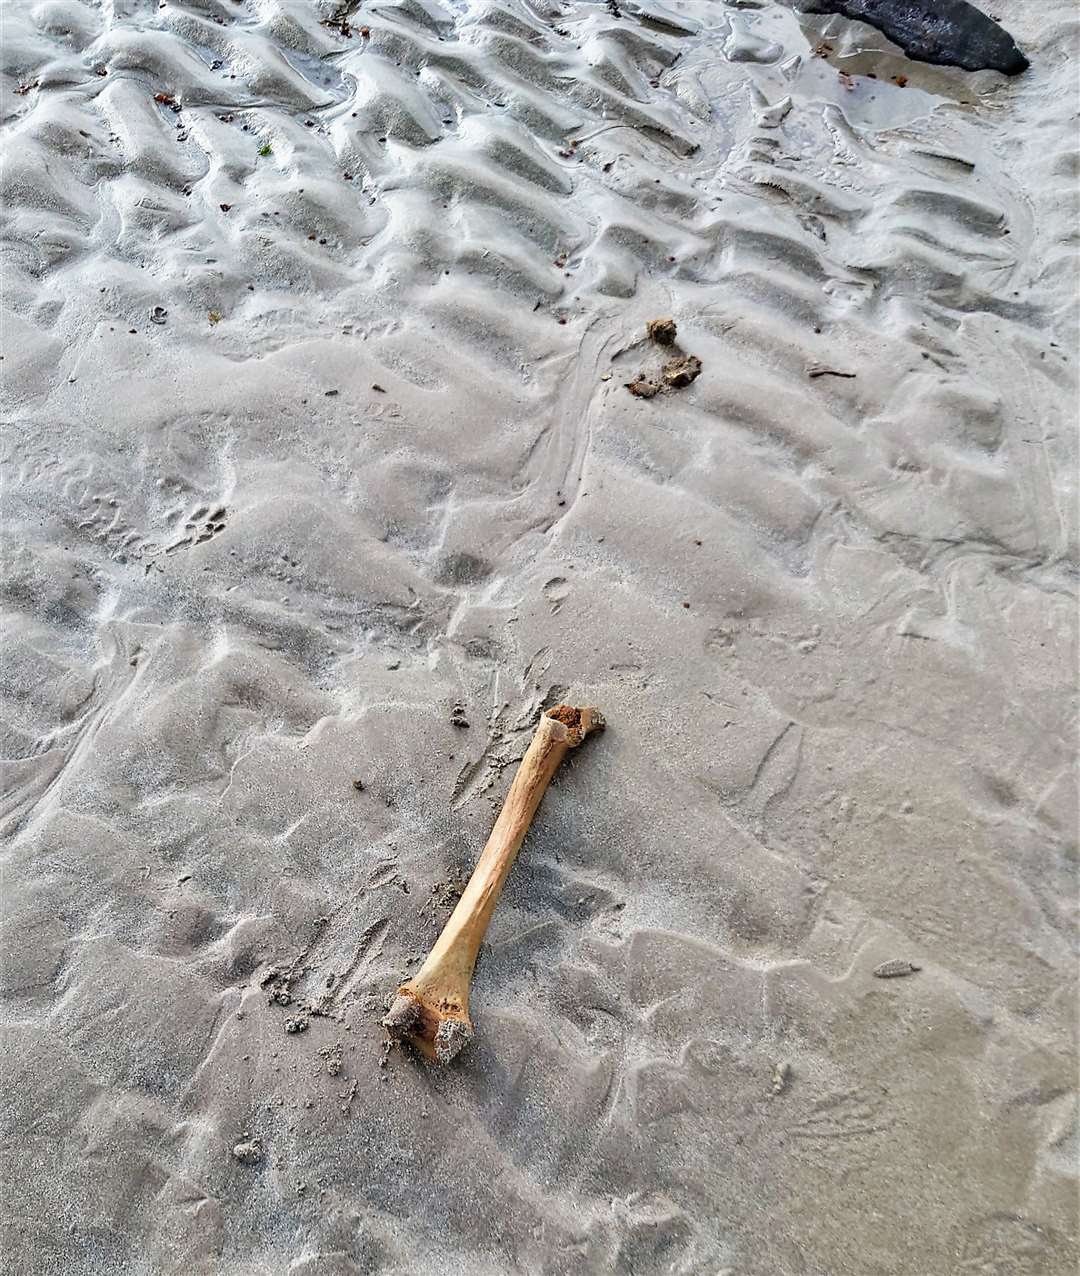 The possible human leg bone was found at low tide at Dunnet beach in August last year. Picture: Martin Gauer